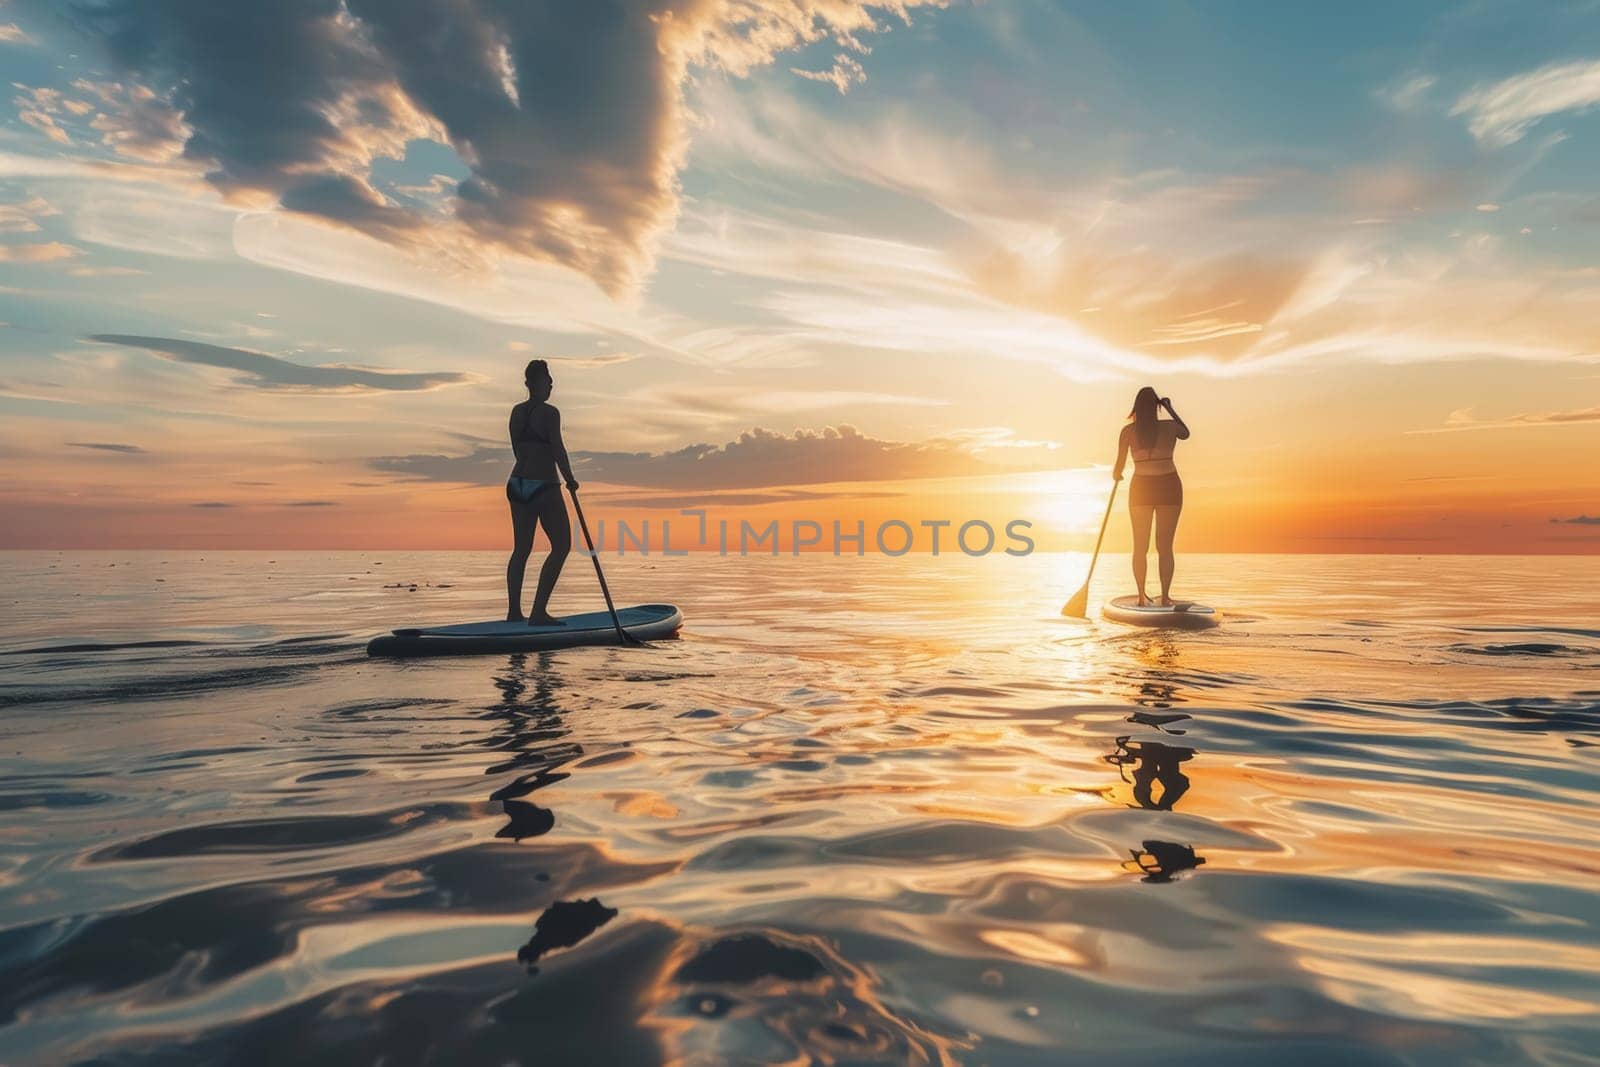 Silhouette of a person stand-up paddleboarding on a tranquil water surface reflecting a vibrant sunset